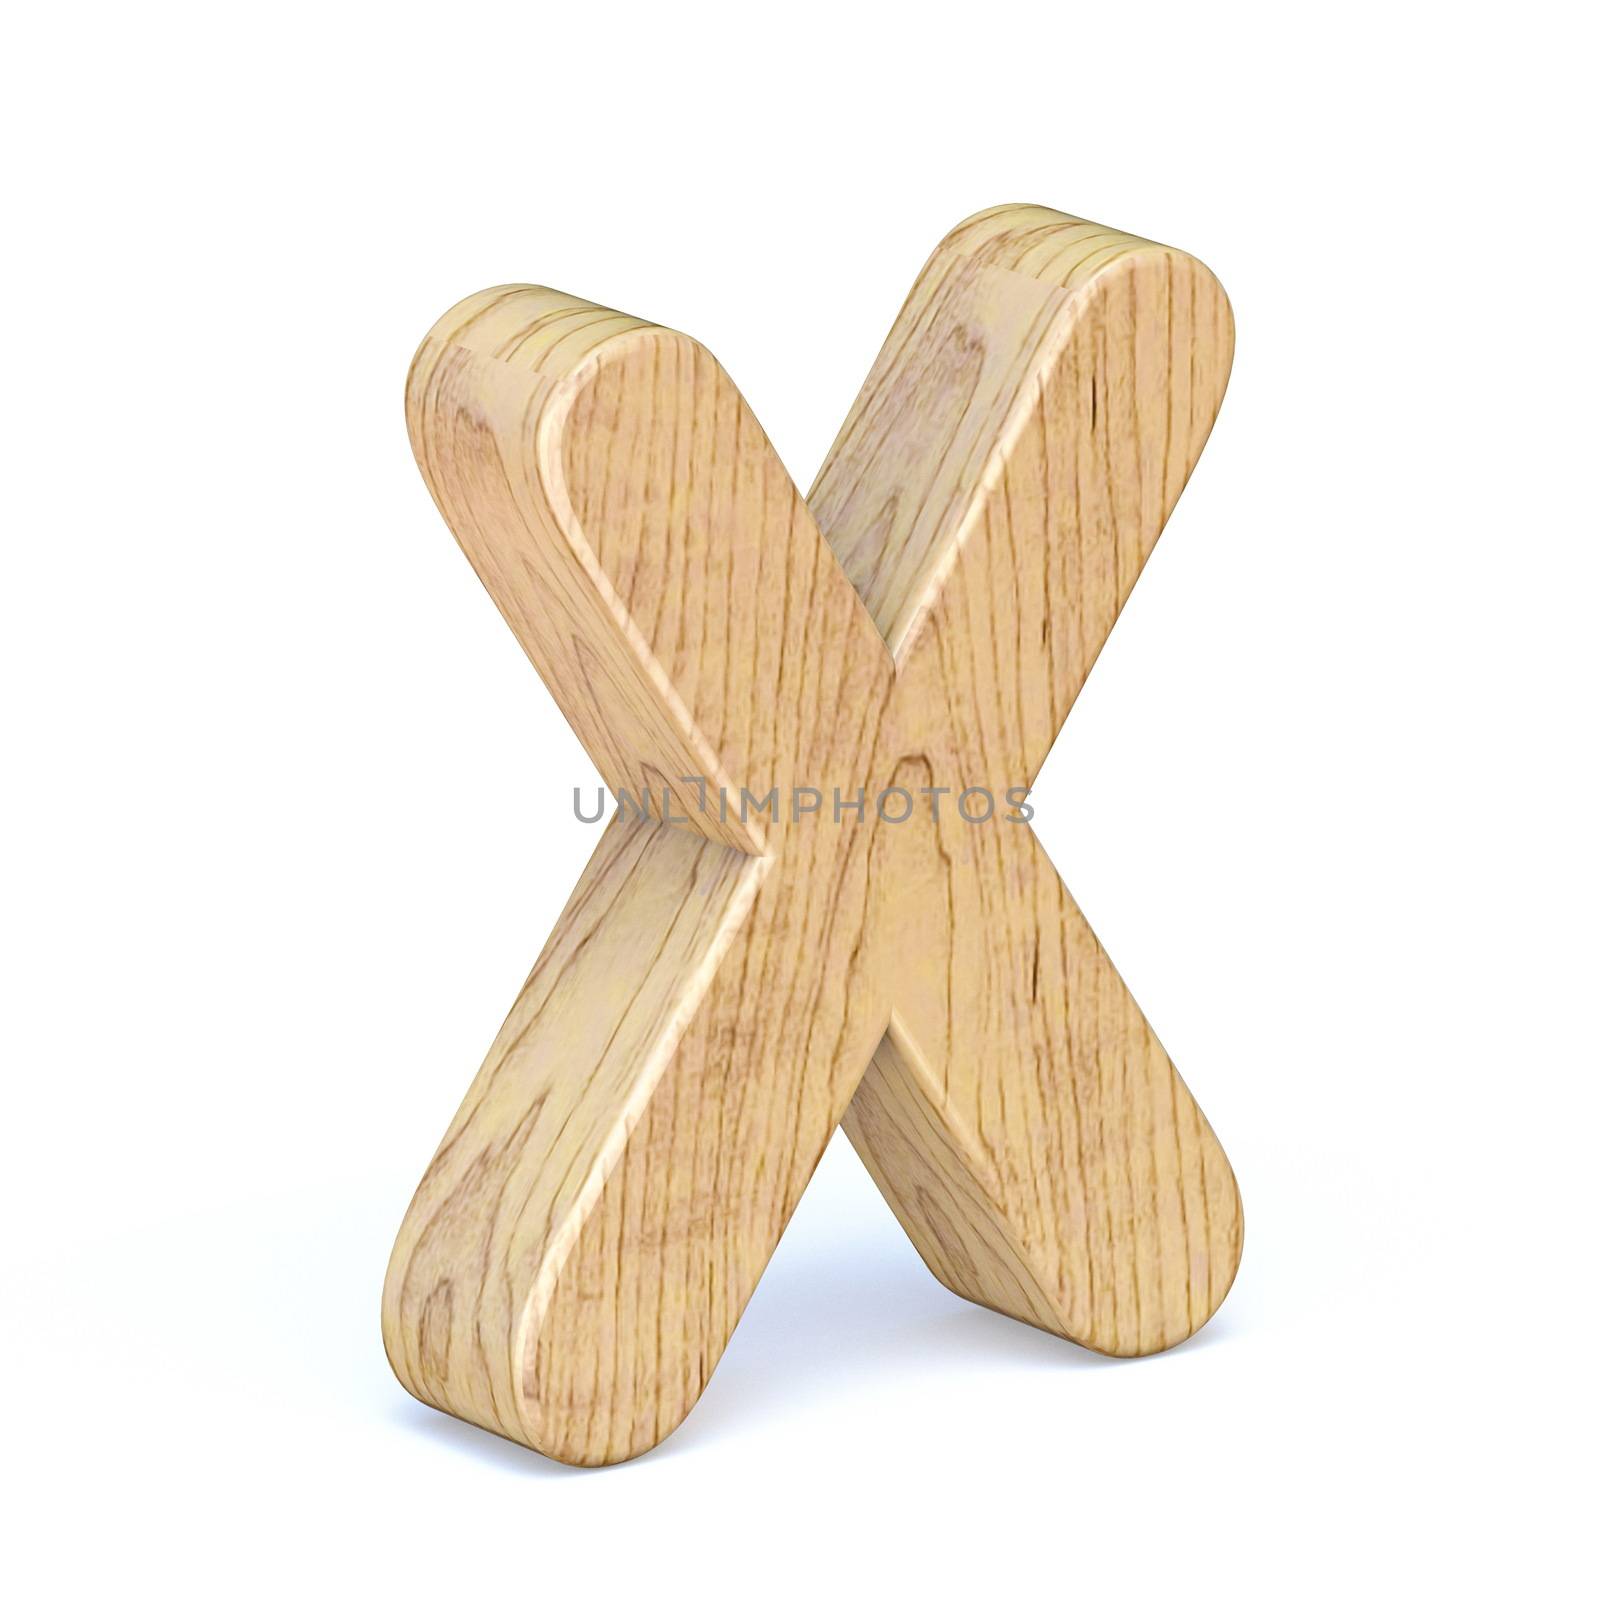 Rounded wooden font Letter X 3D render illustration isolated on white background